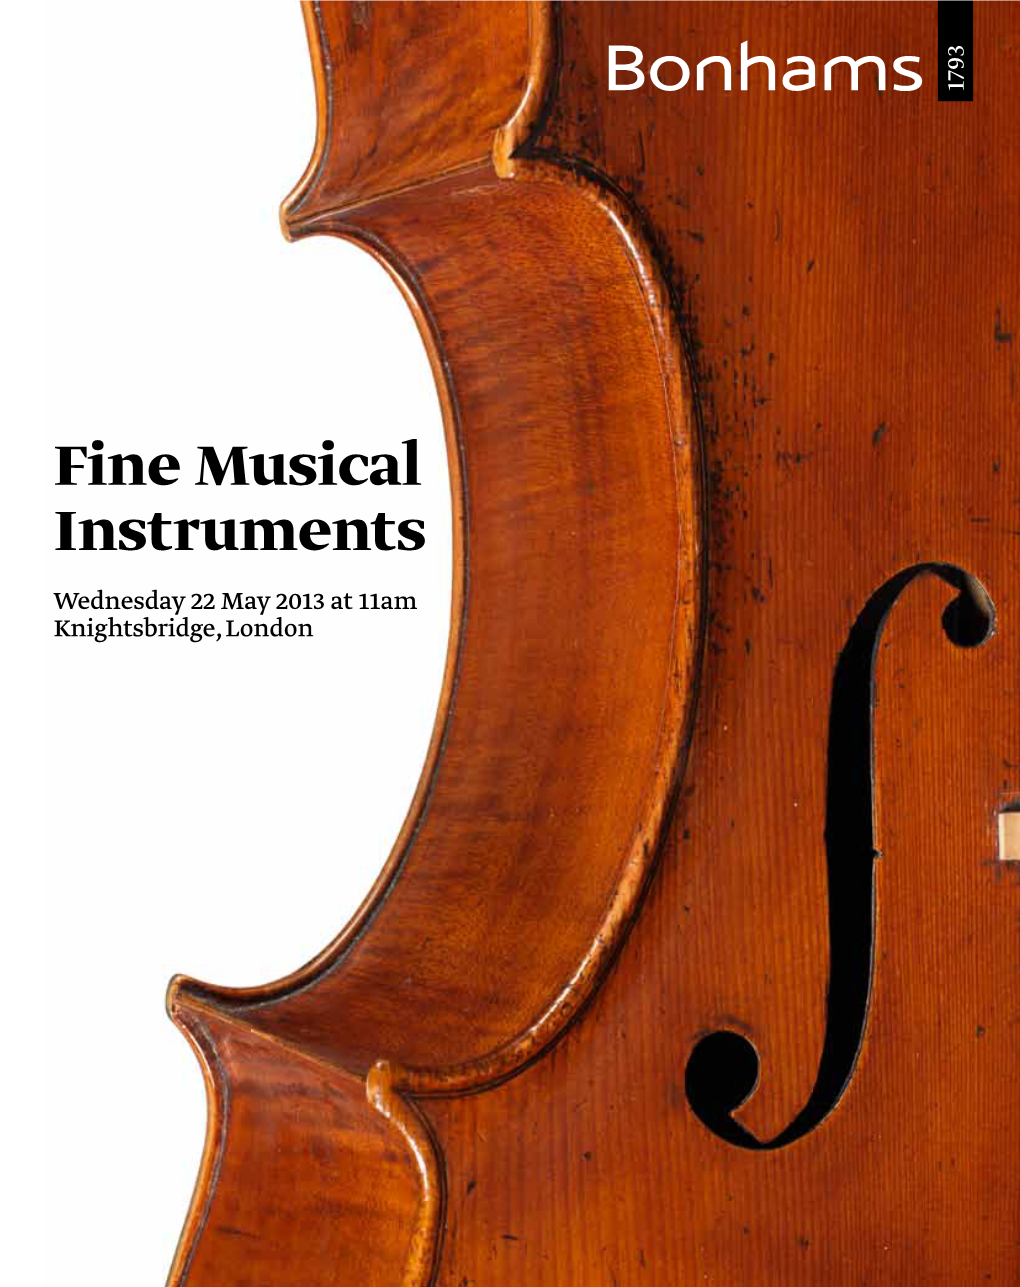 Fine Musical Instruments Wednesday 22 May 2013 at 11Am Knightsbridge, London